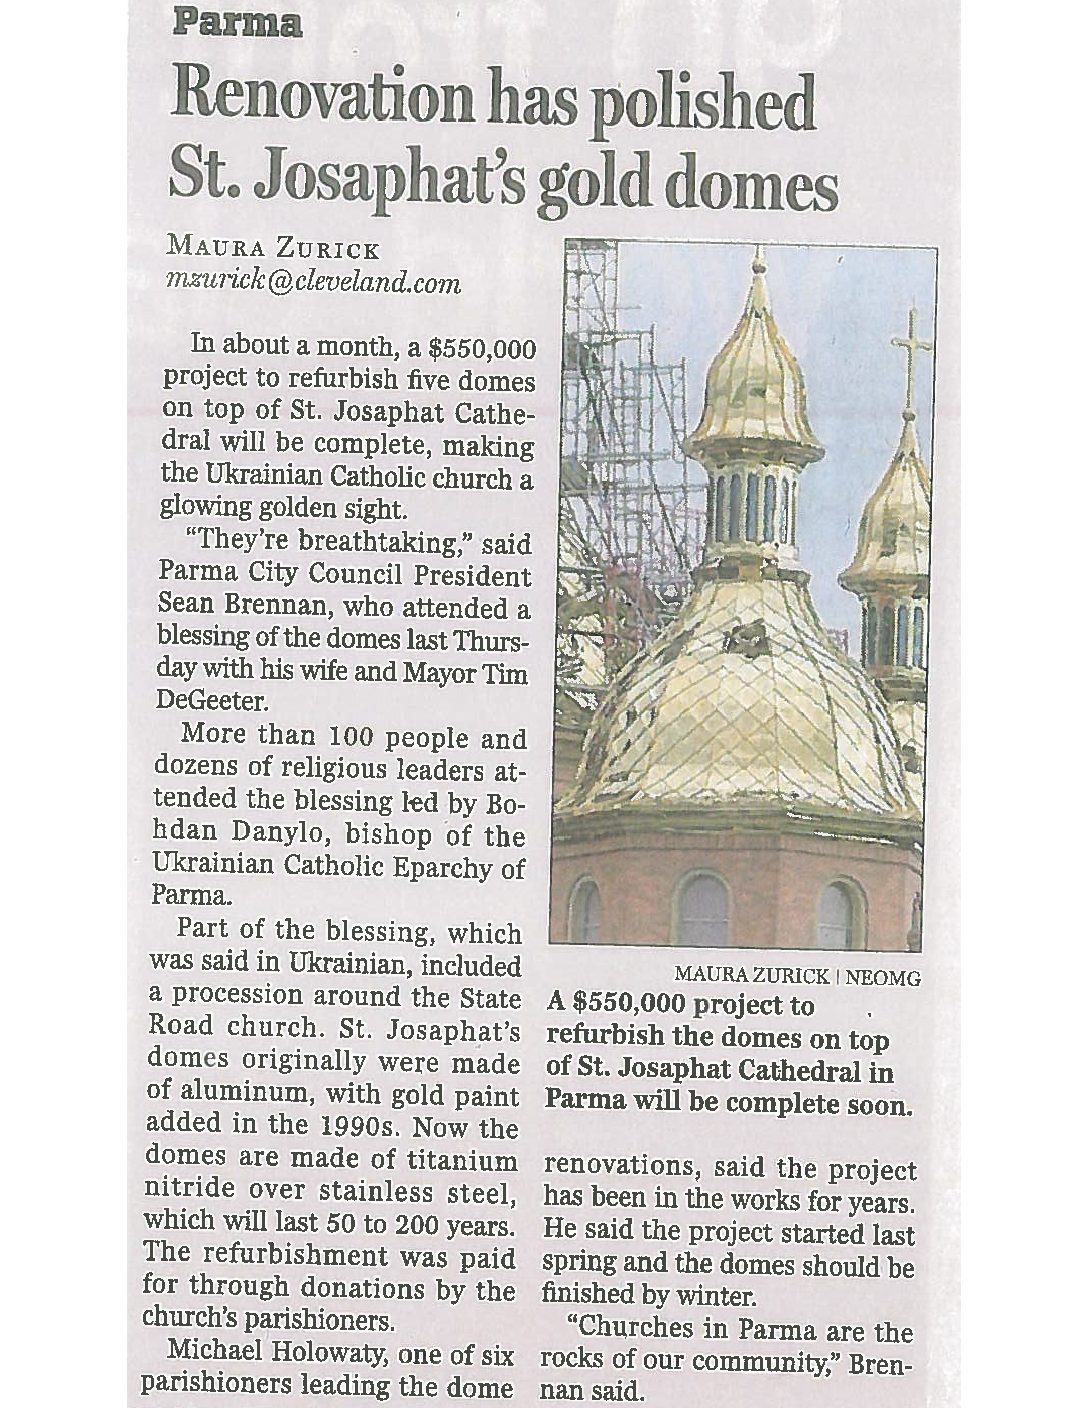 PARMA'S ST. JOSAPHAT CATHEDRAL GOLD DOMES GET RENOVATION